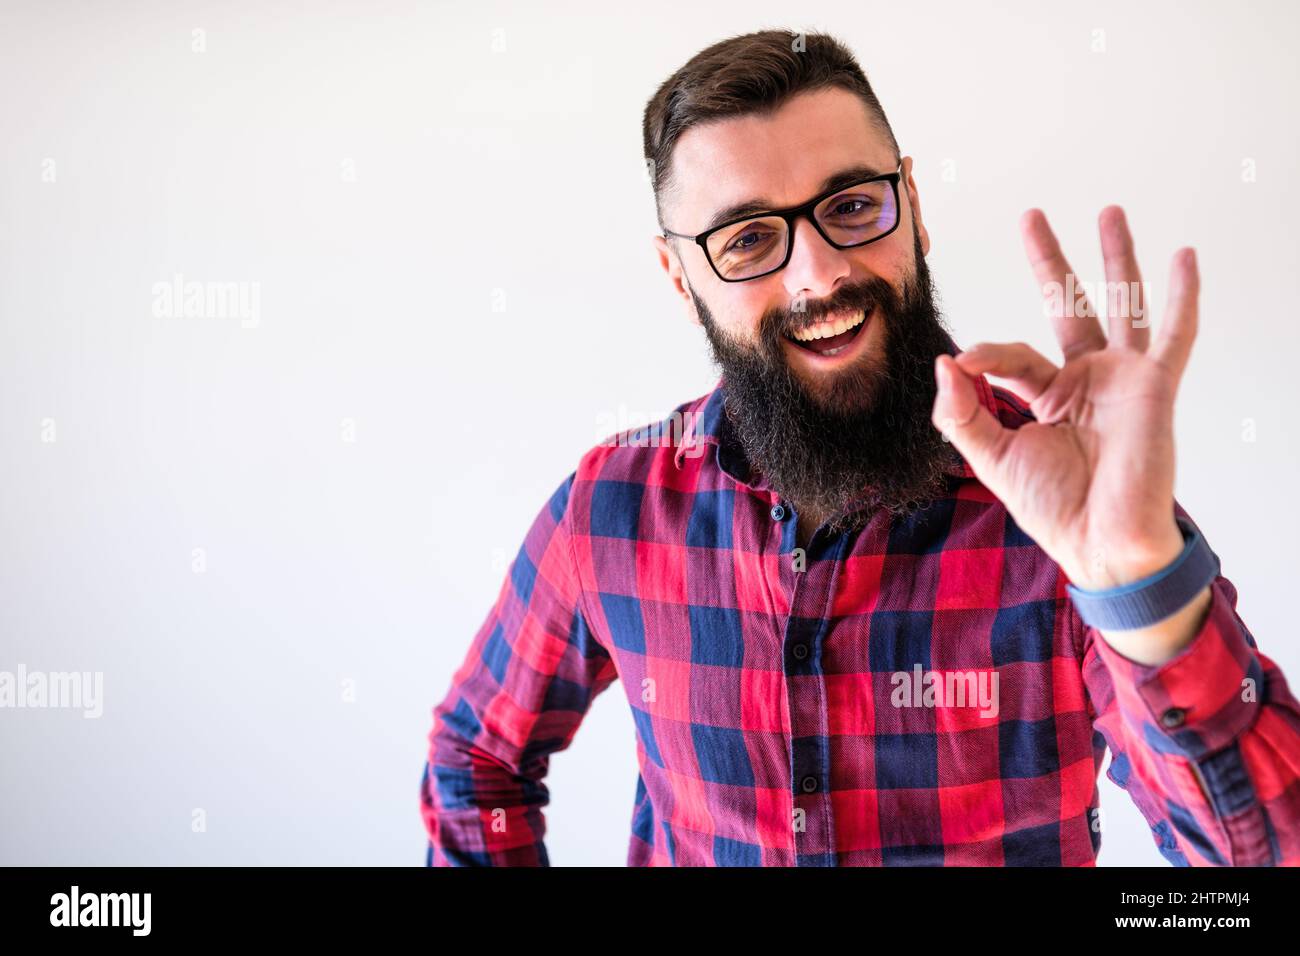 Portrait of man who is ecstatic. Copy space on image for your text or advert. Stock Photo